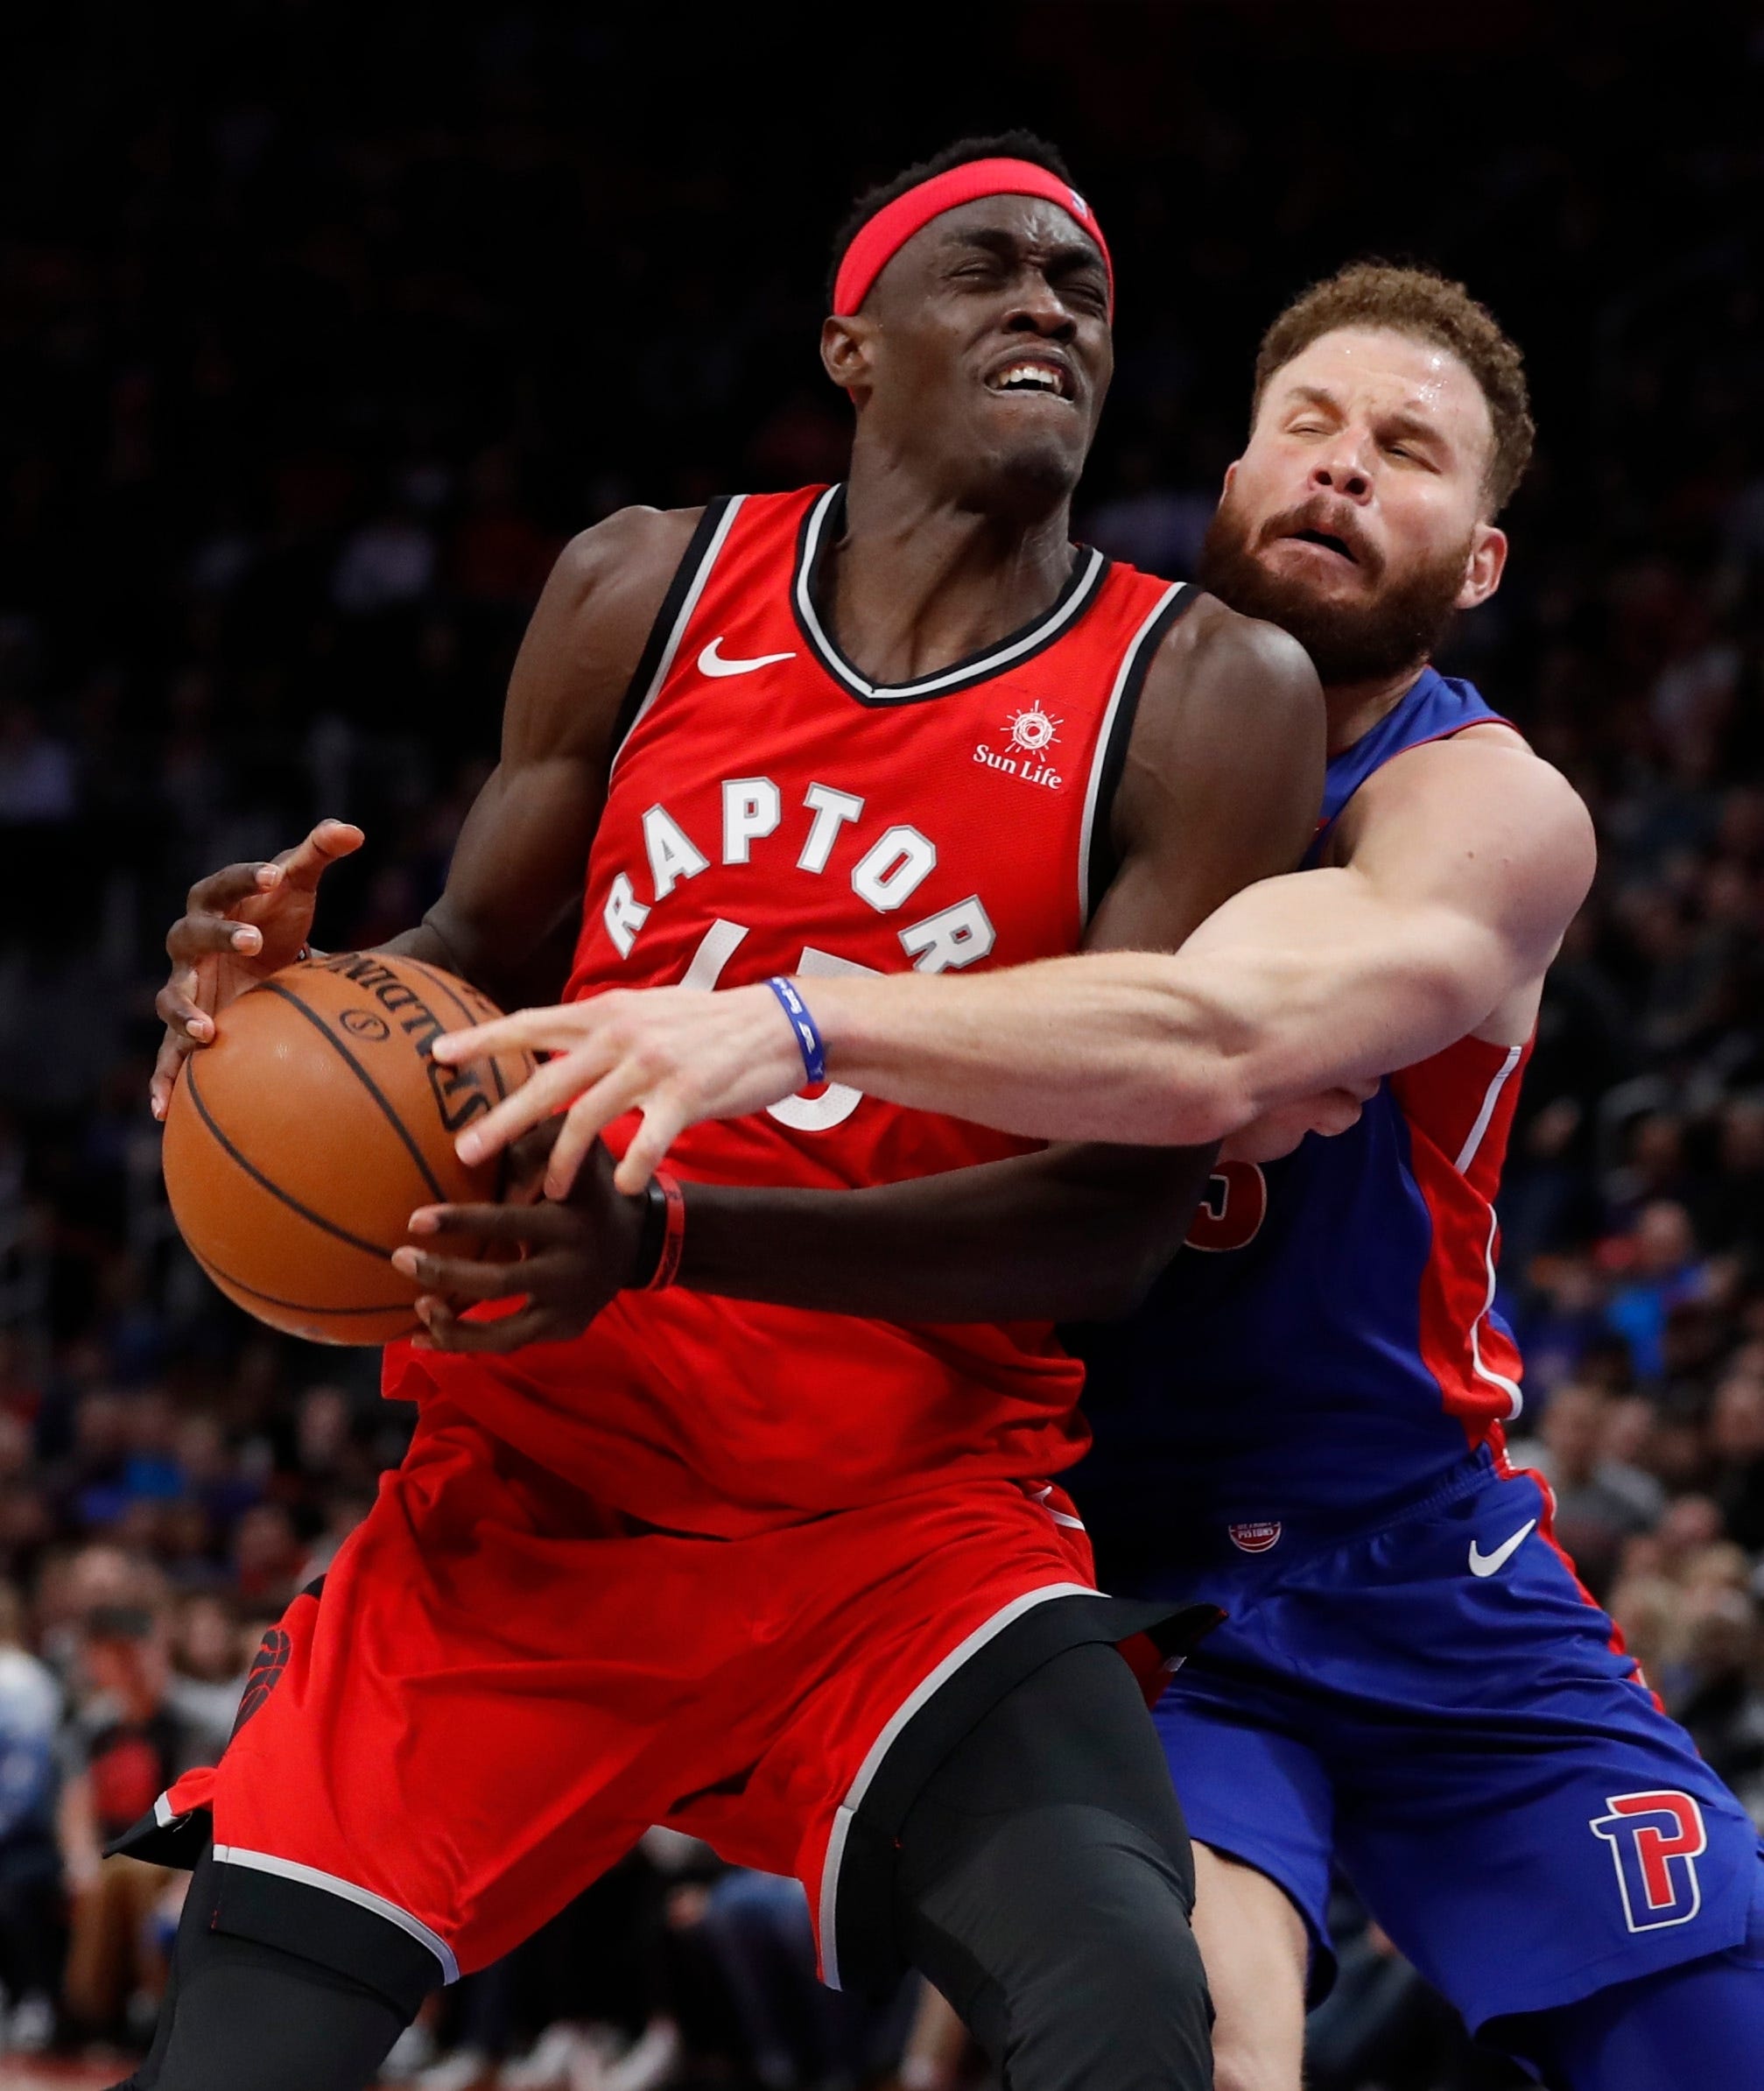 Detroit Pistons forward Blake Griffin knocks the ball away from Toronto Raptors forward Pascal Siakam during the second half.